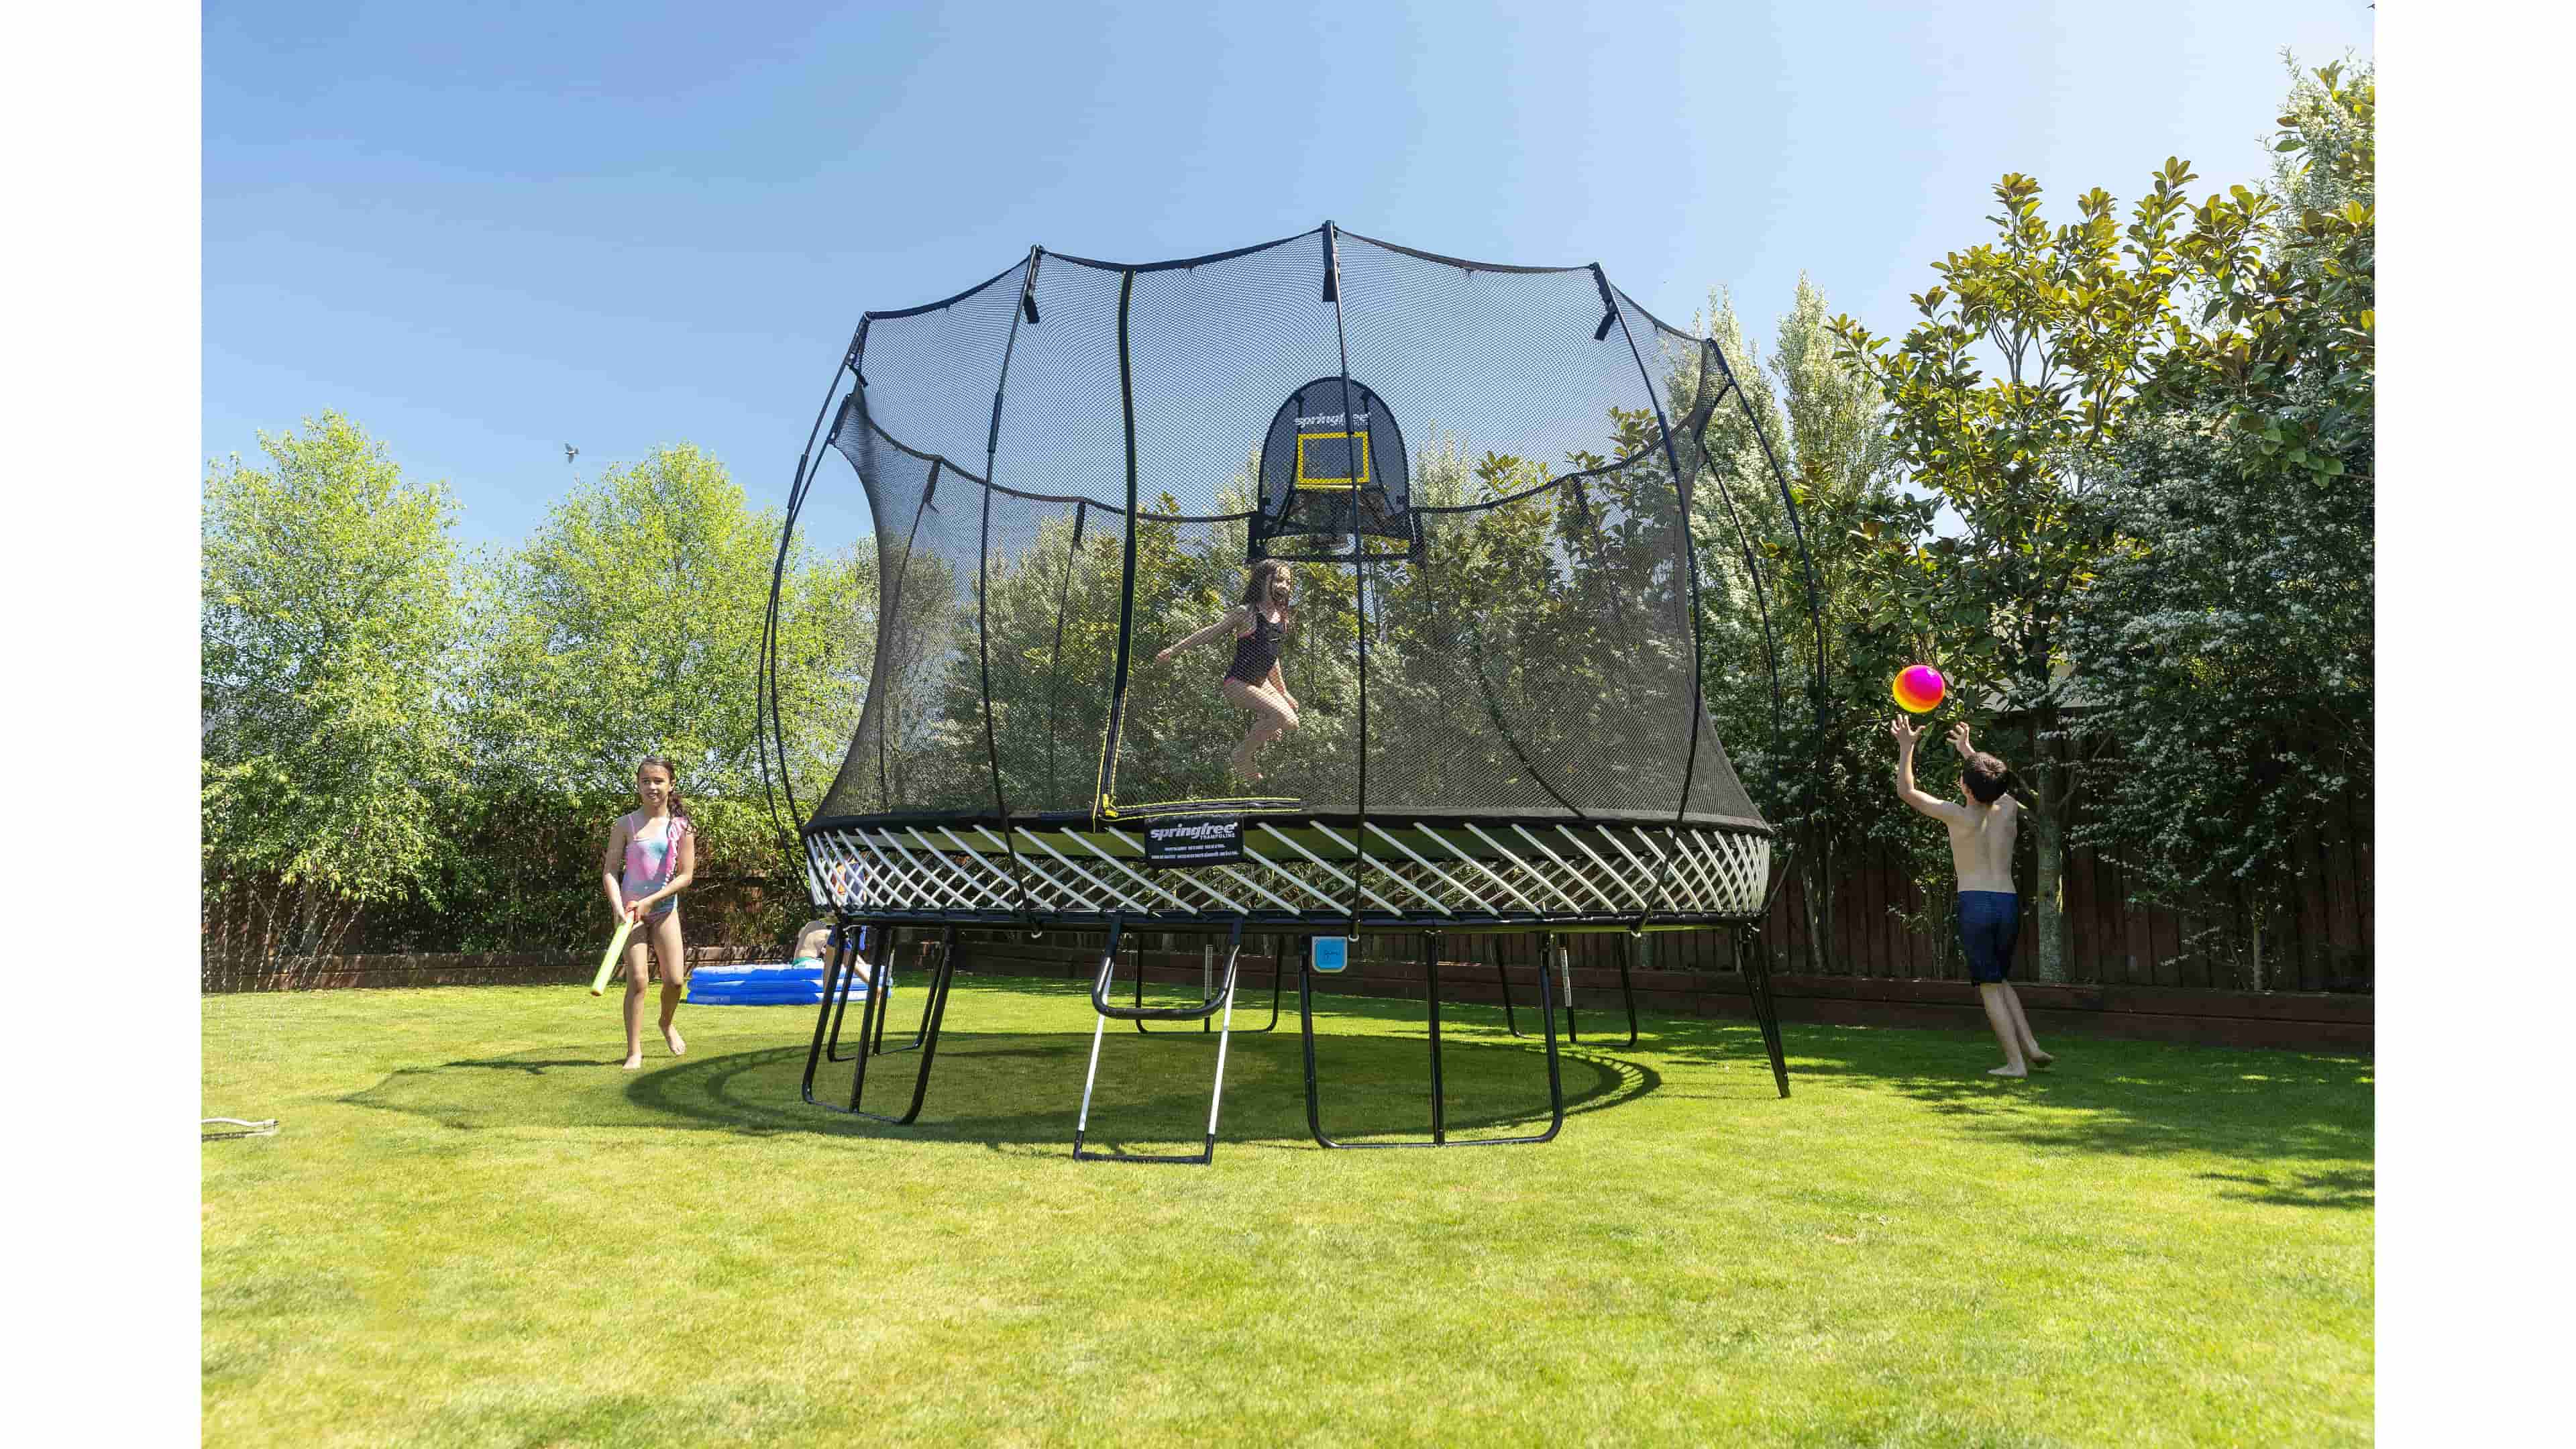 Trampoline Safety: 22 Tips and What Not to Do